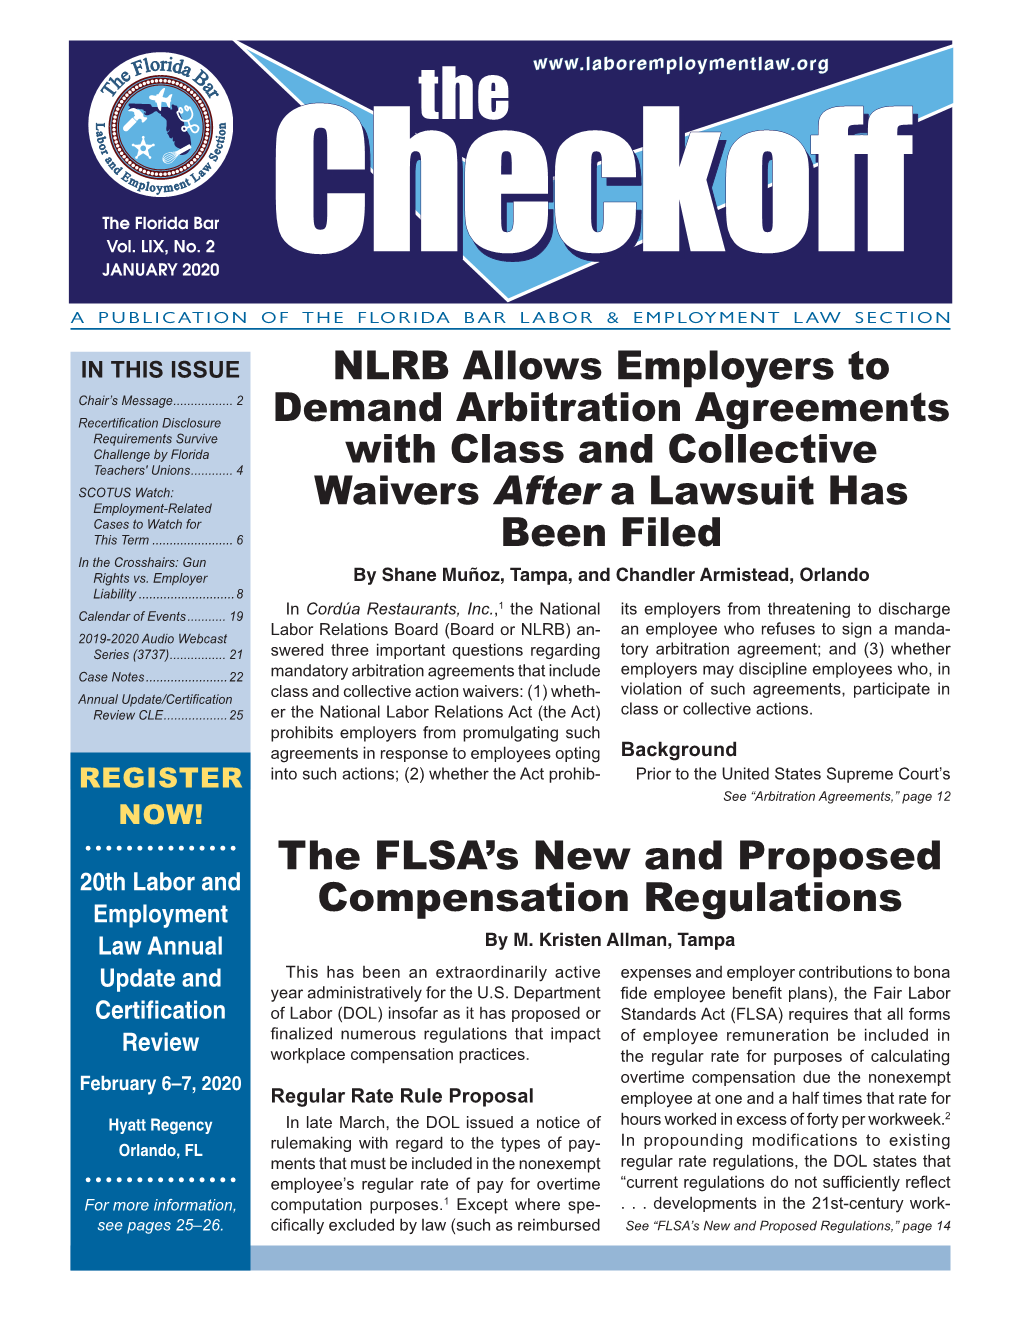 JANUARY 2020 Chchececkoffkoff a PUBLICATION of the FLORIDA BAR LABOR & EMPLOYMENT LAW SECTION